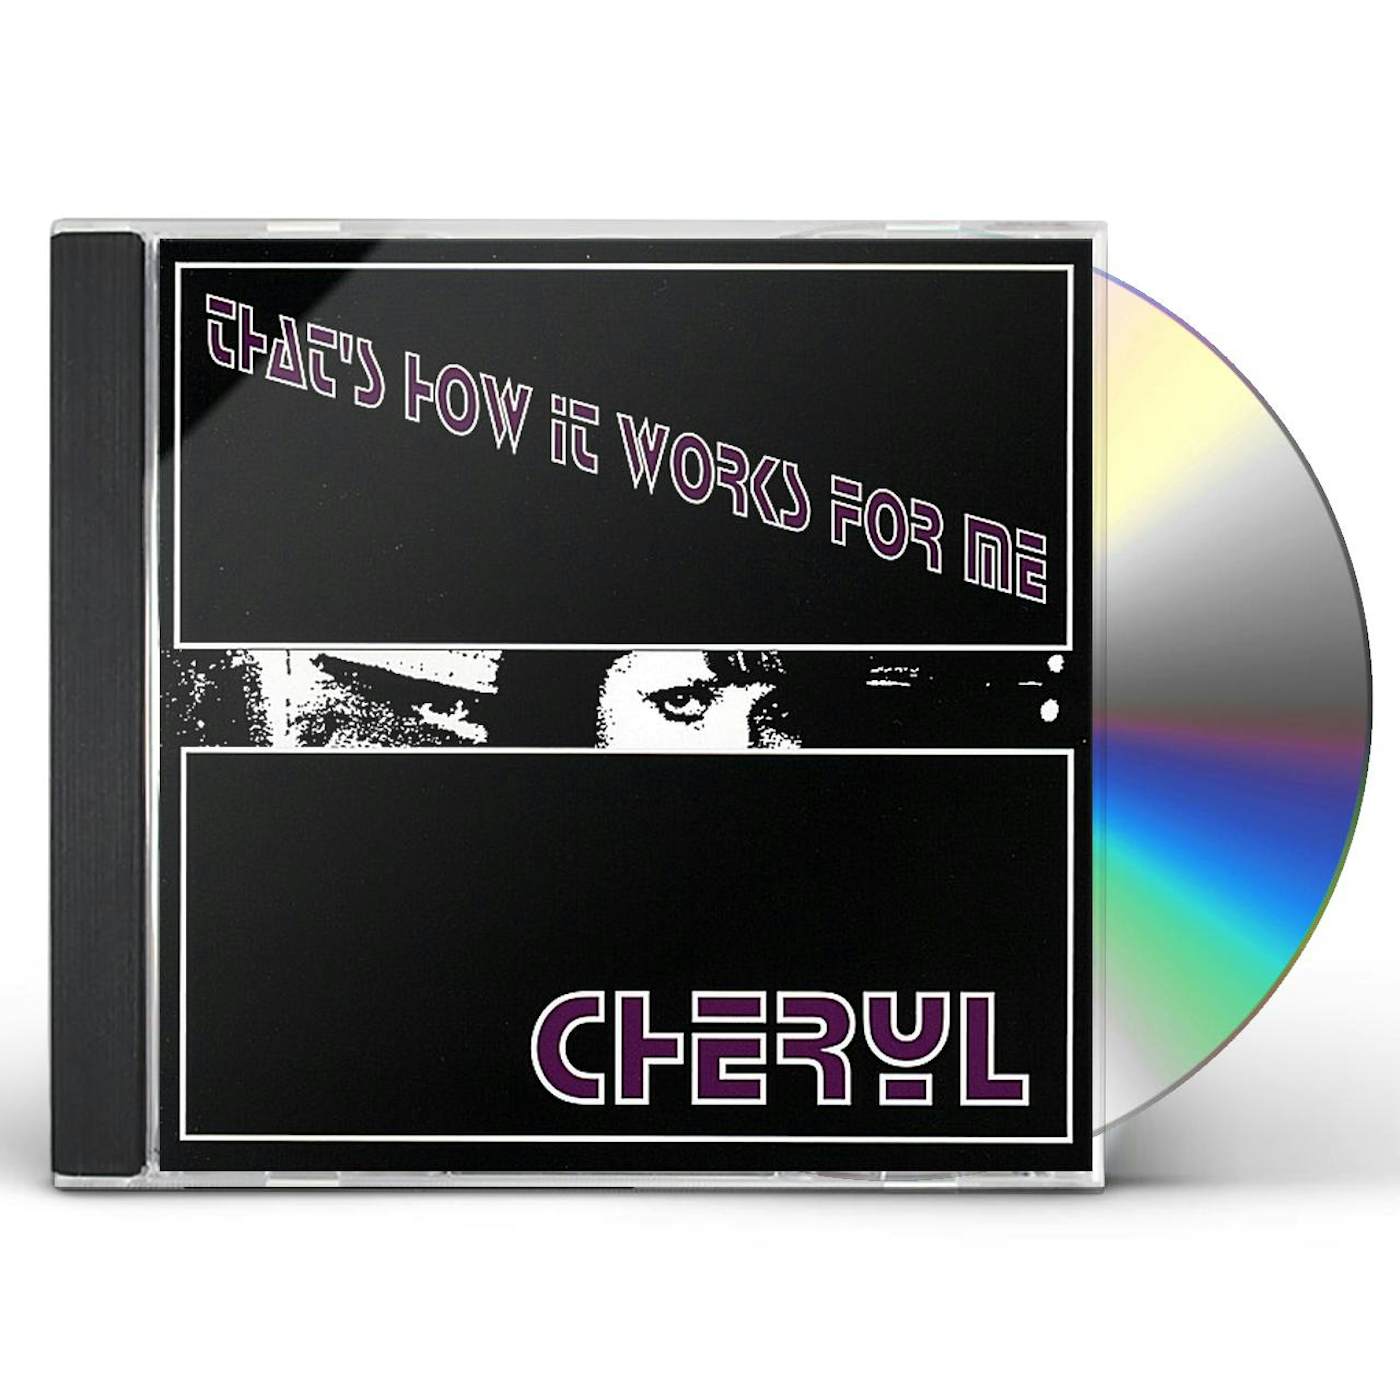 Cheryl THAT'S HOW IT WORKS FOR ME CD